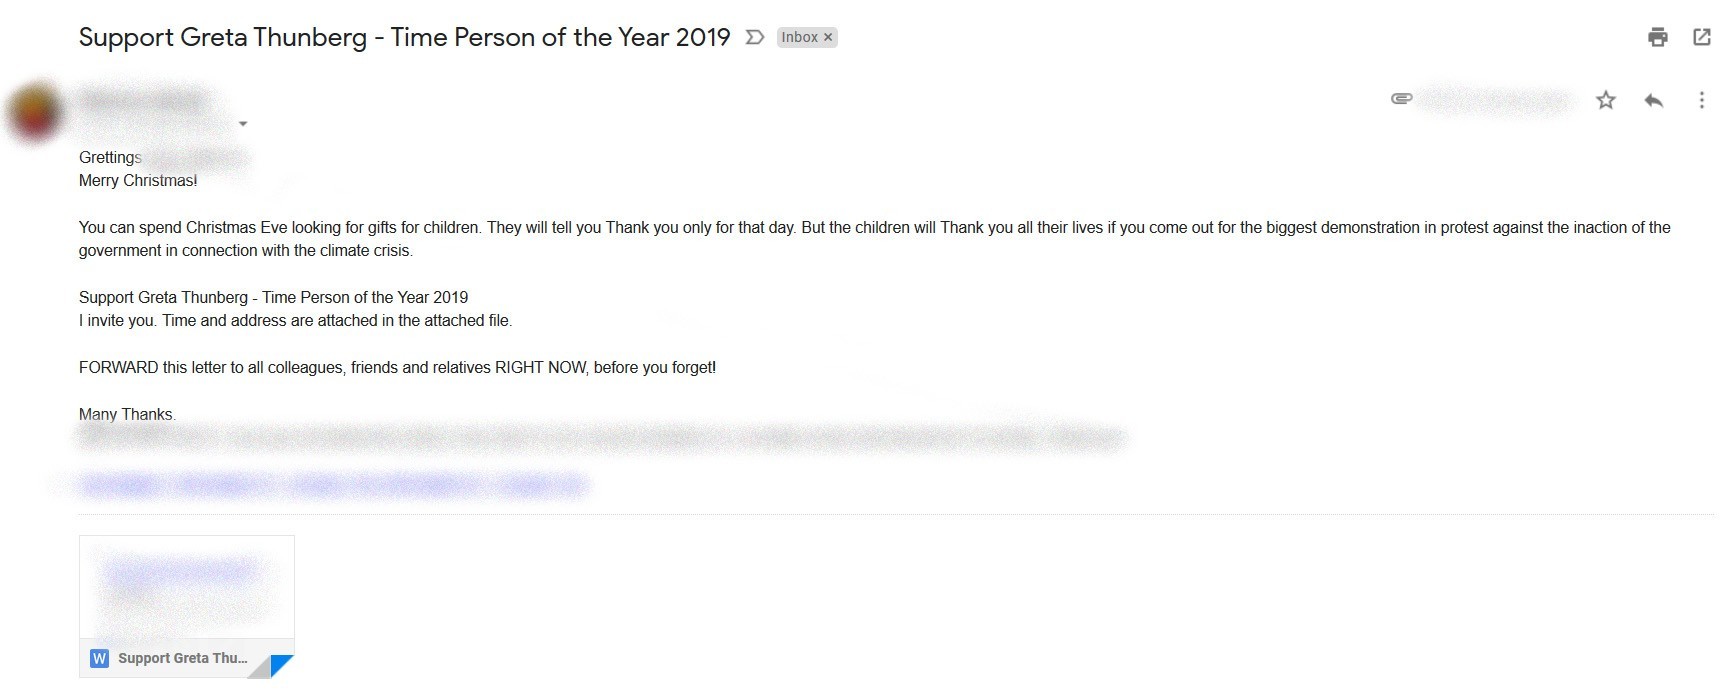 Image showing an example how the phishing email may look like